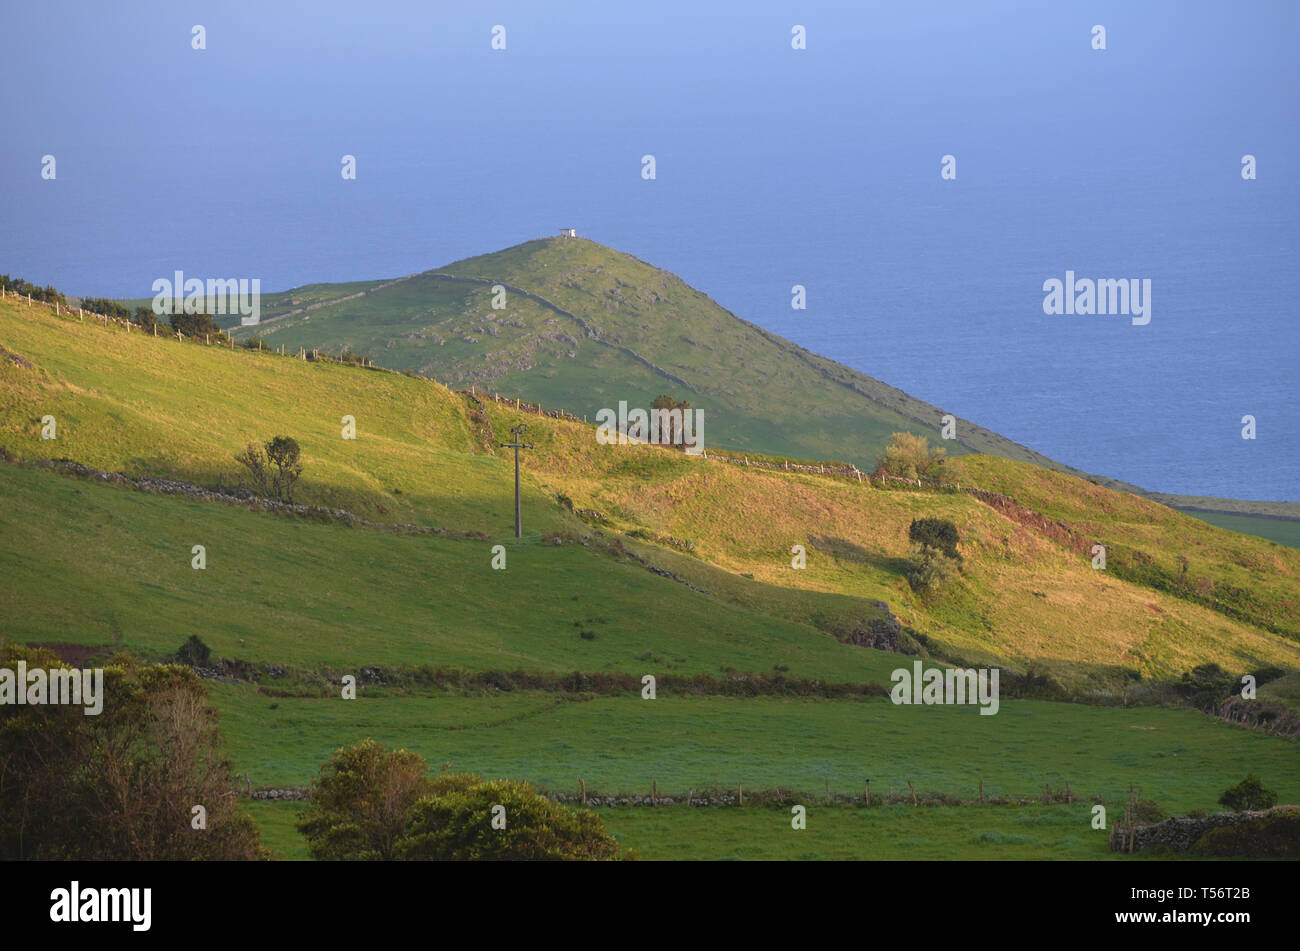 Pastures and rural landscapes in Malbusca, a small parish in the island of Santa Maria, Azores archipelago Stock Photo